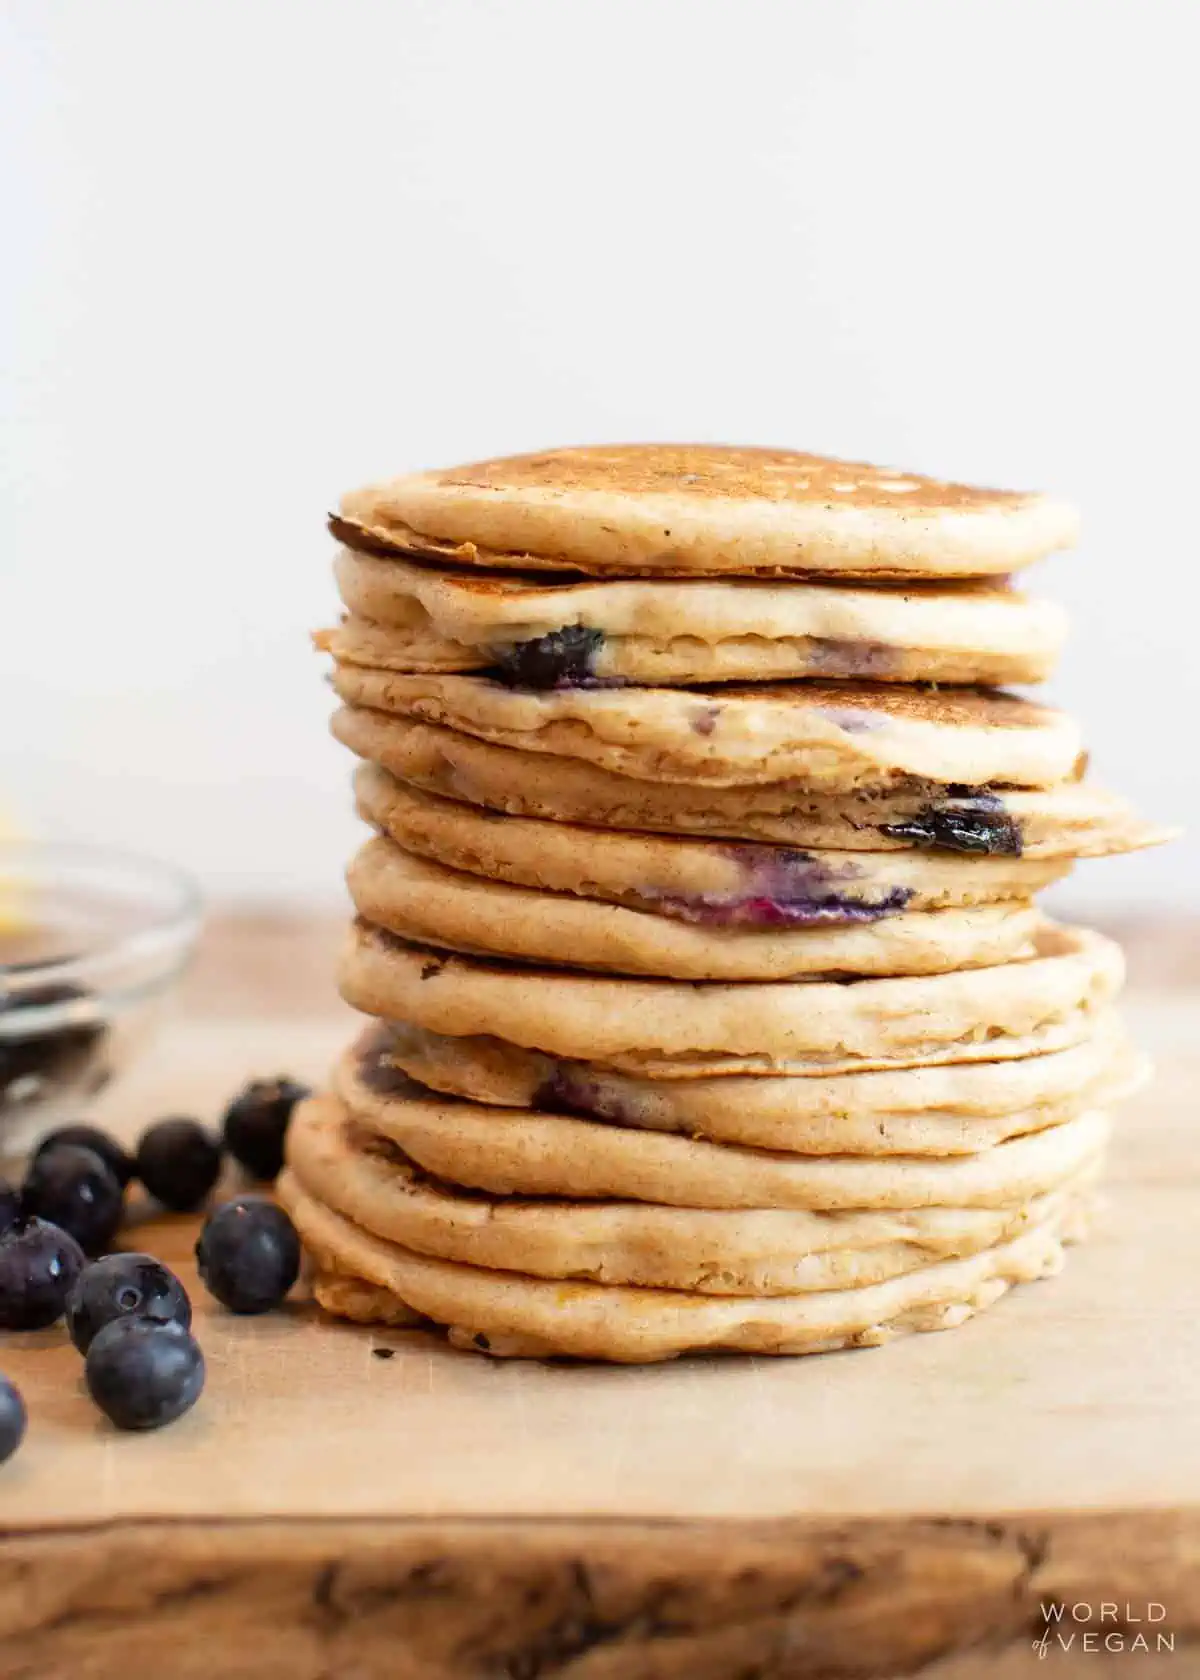 A stall stack of vegan blueberry pancakes, with additional blueberries scattered around.